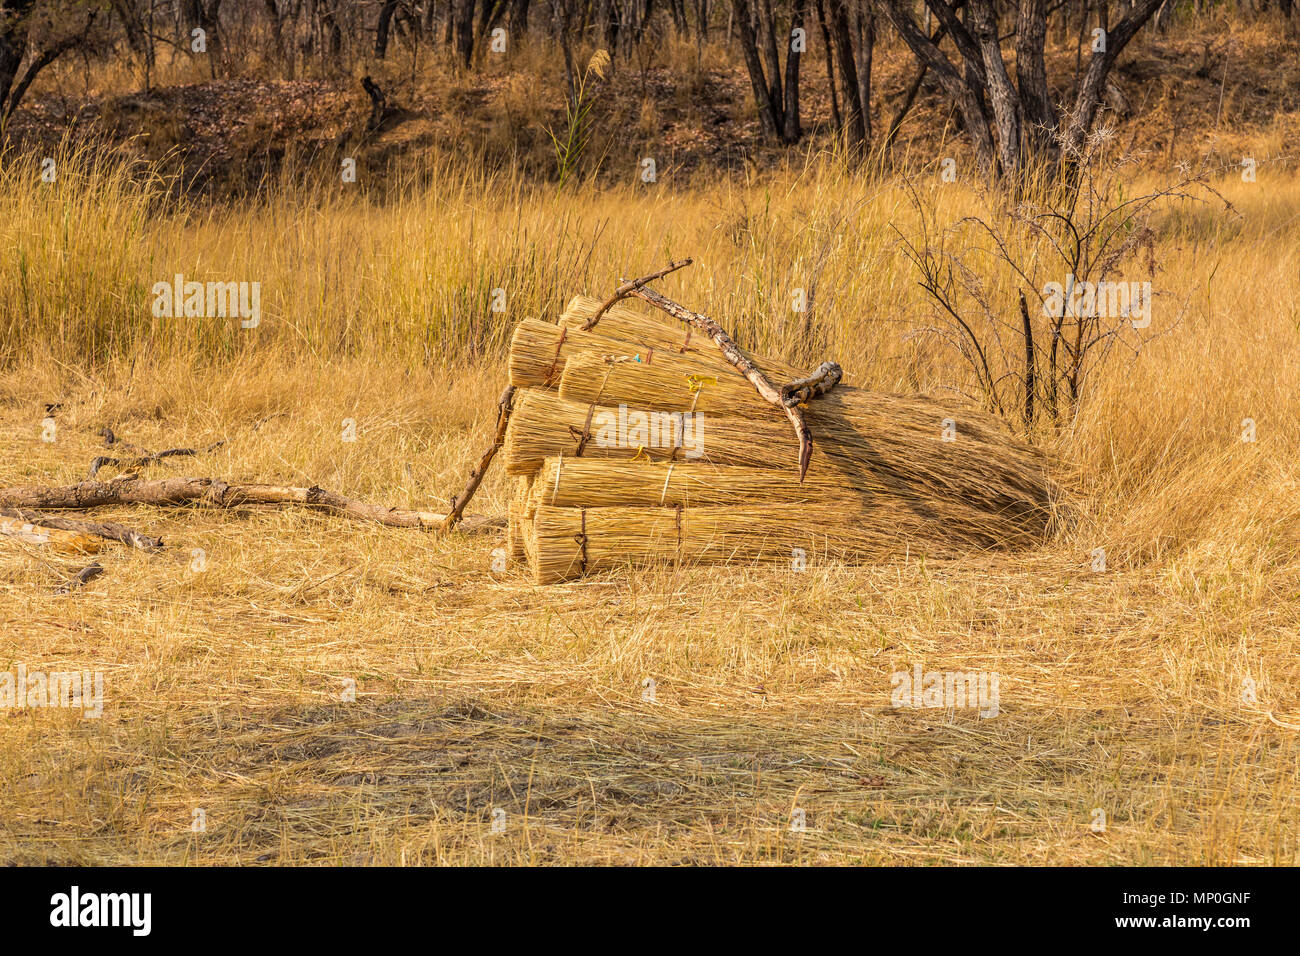 Cut grass in bundles ready for thatching traditional houses in Zimbabwe Stock Photo